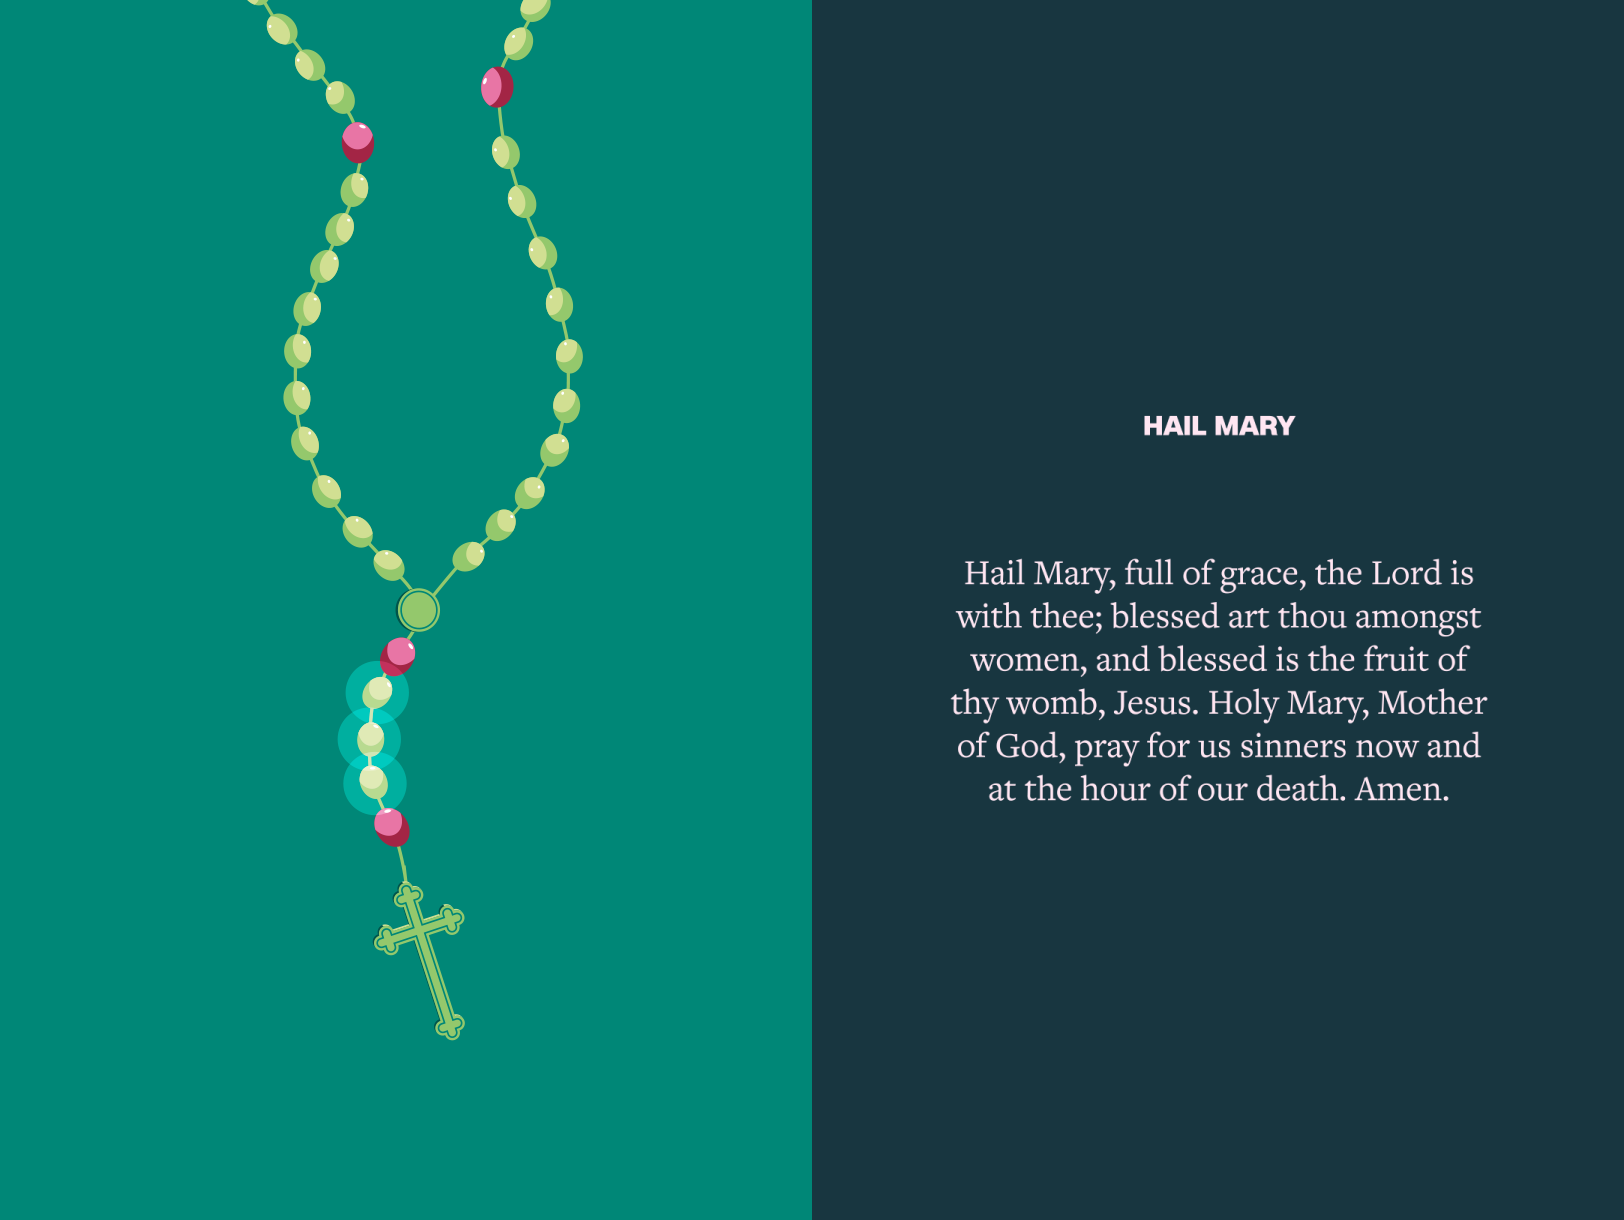 Rosary beads with a highlight on the next three beads